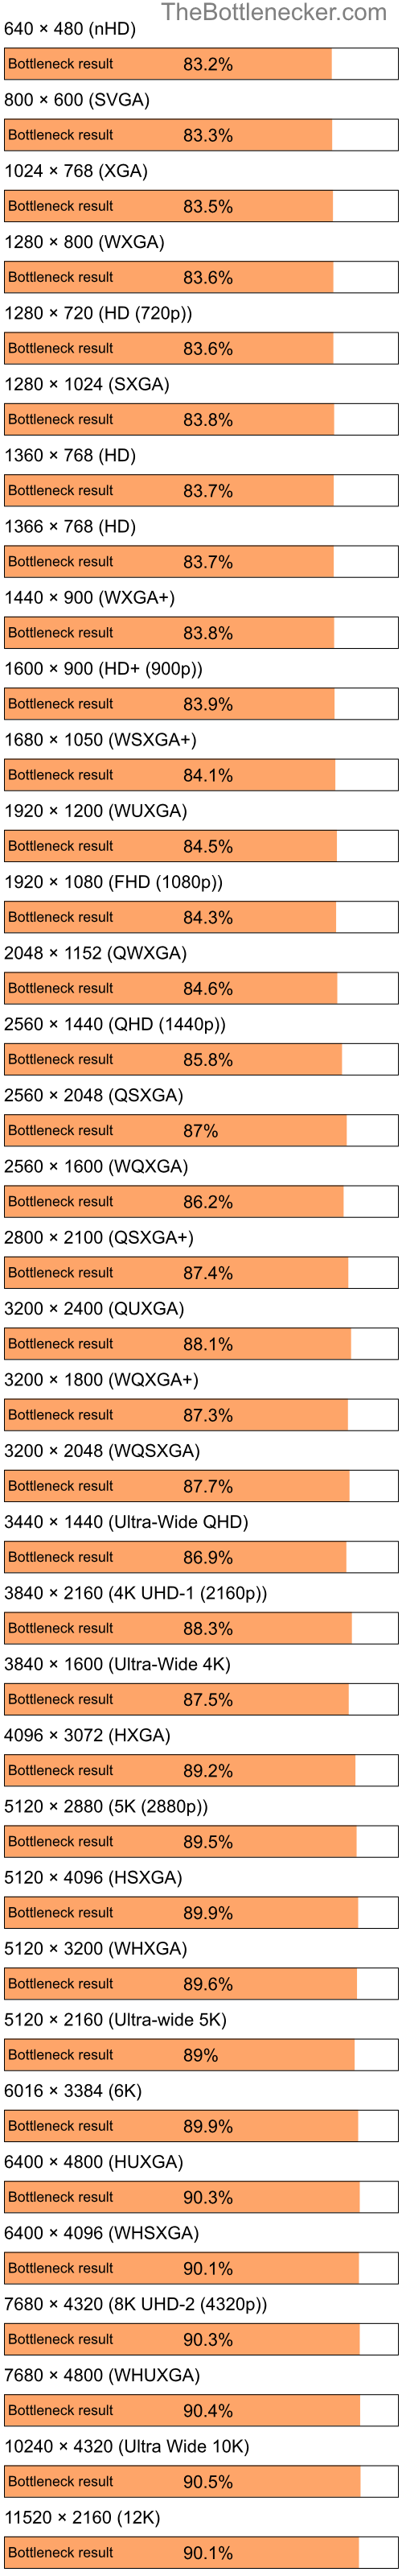 Bottleneck results by resolution for Intel Celeron and NVIDIA nForce 610i in Graphic Card Intense Tasks